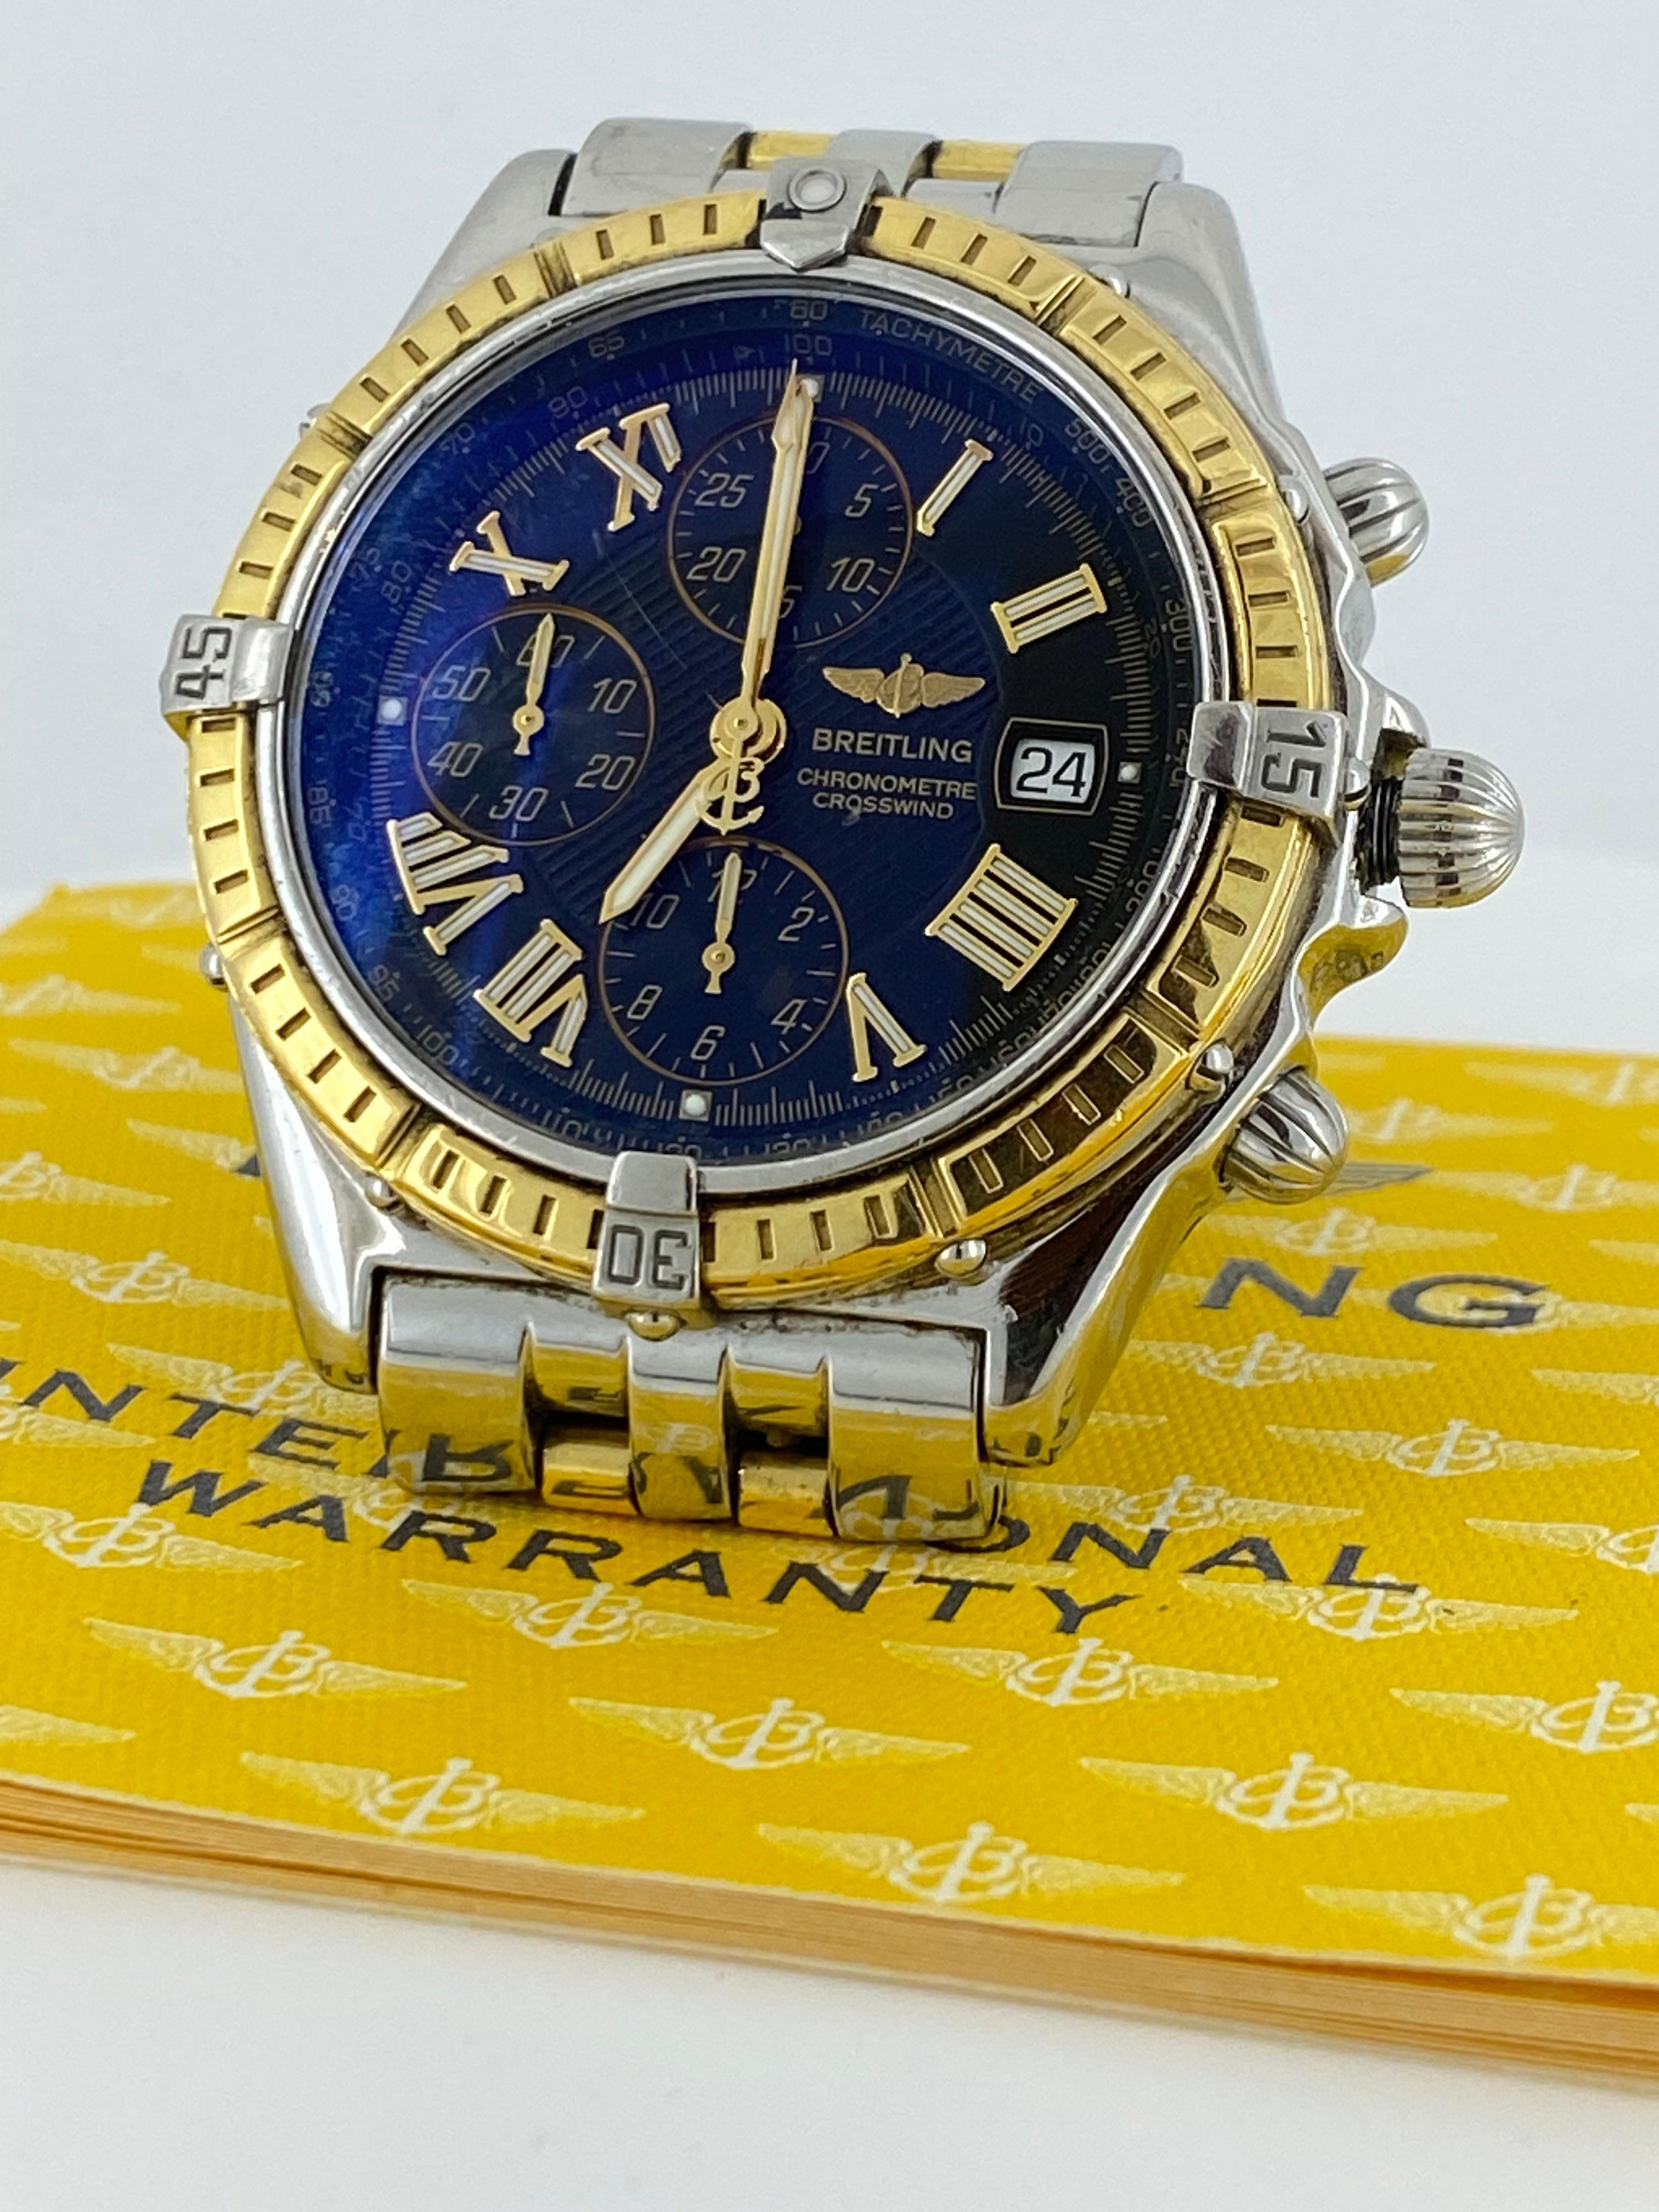 Men's Breitling ref D13355 18K Gold & Steel 42mm Automatic Watch, c2003, Box + Papers For Sale